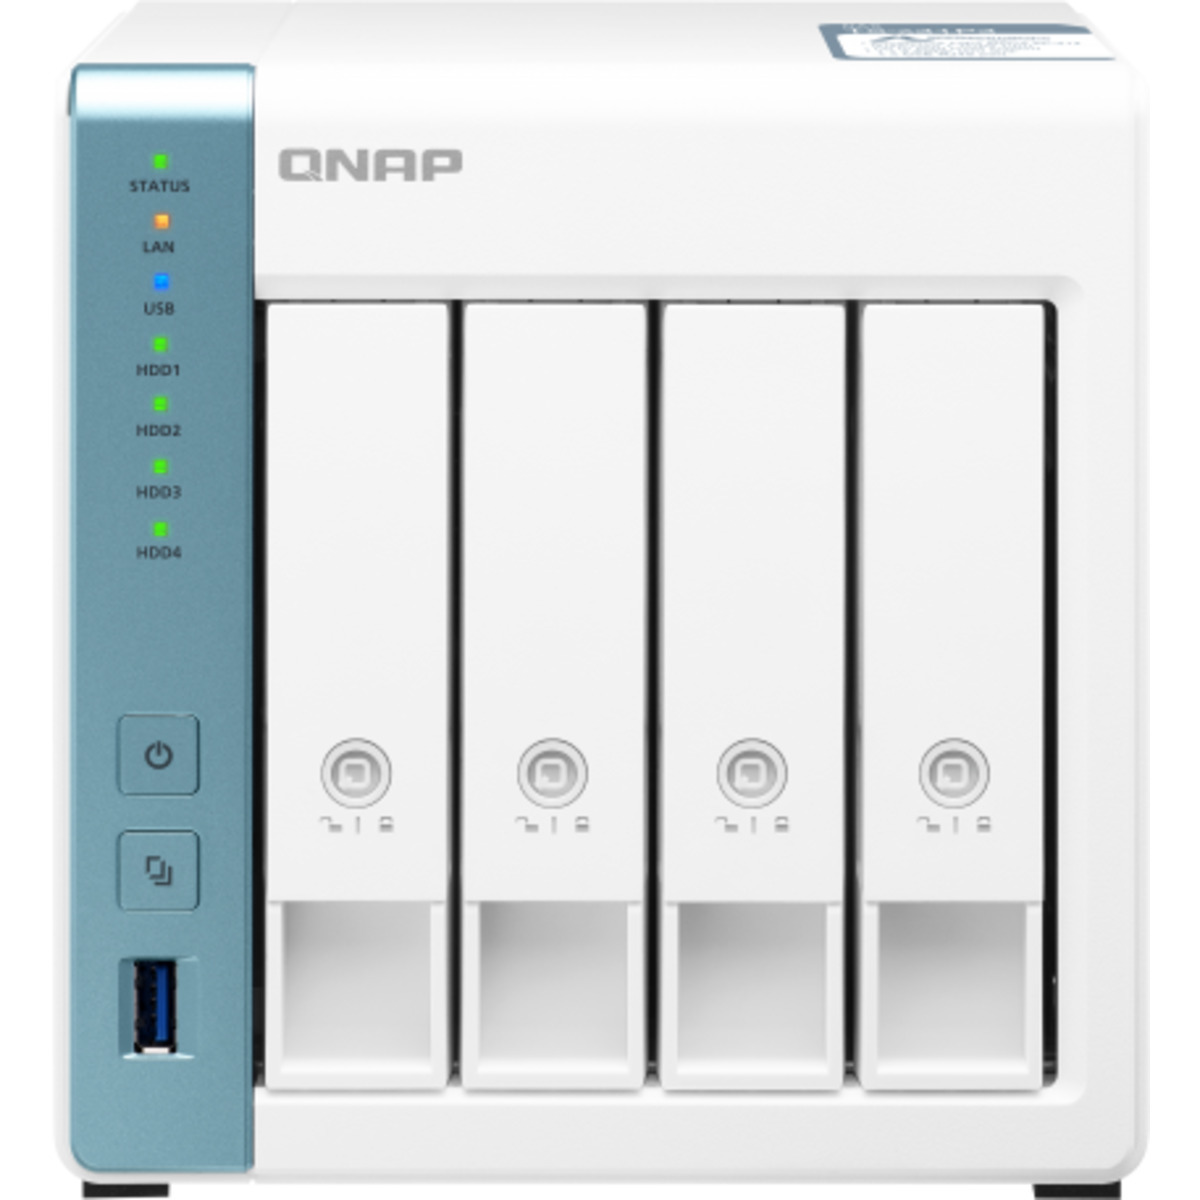 buy $2564 QNAP TS-431P3 32tb Desktop NAS - Network Attached Storage Device 4x8000gb Samsung 870 QVO MZ-77Q8T0 2.5 560/530MB/s SATA 6Gb/s SSD CONSUMER Class Drives Installed - Burn-In Tested - FREE RAM UPGRADE - nas headquarters buy network attached storage server device das new raid-5 free shipping usa TS-431P3